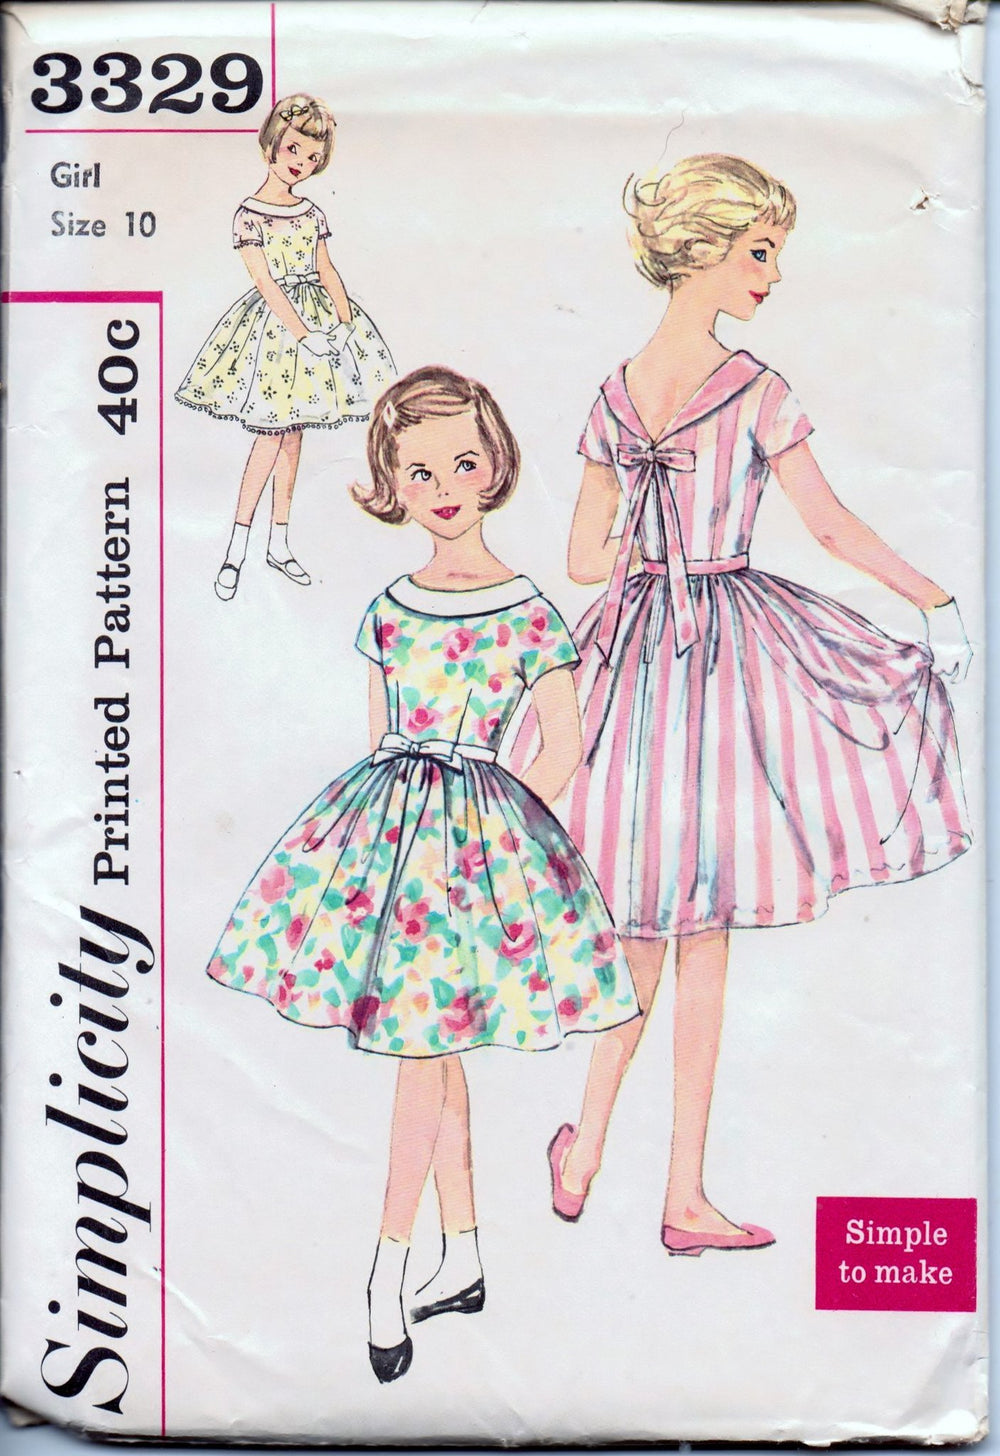 Simplicity 3329 Young Girls Dress with Roll Collar Simple To Make Vintage 1960's Sewing Pattern - VintageStitching - Vintage Sewing Patterns